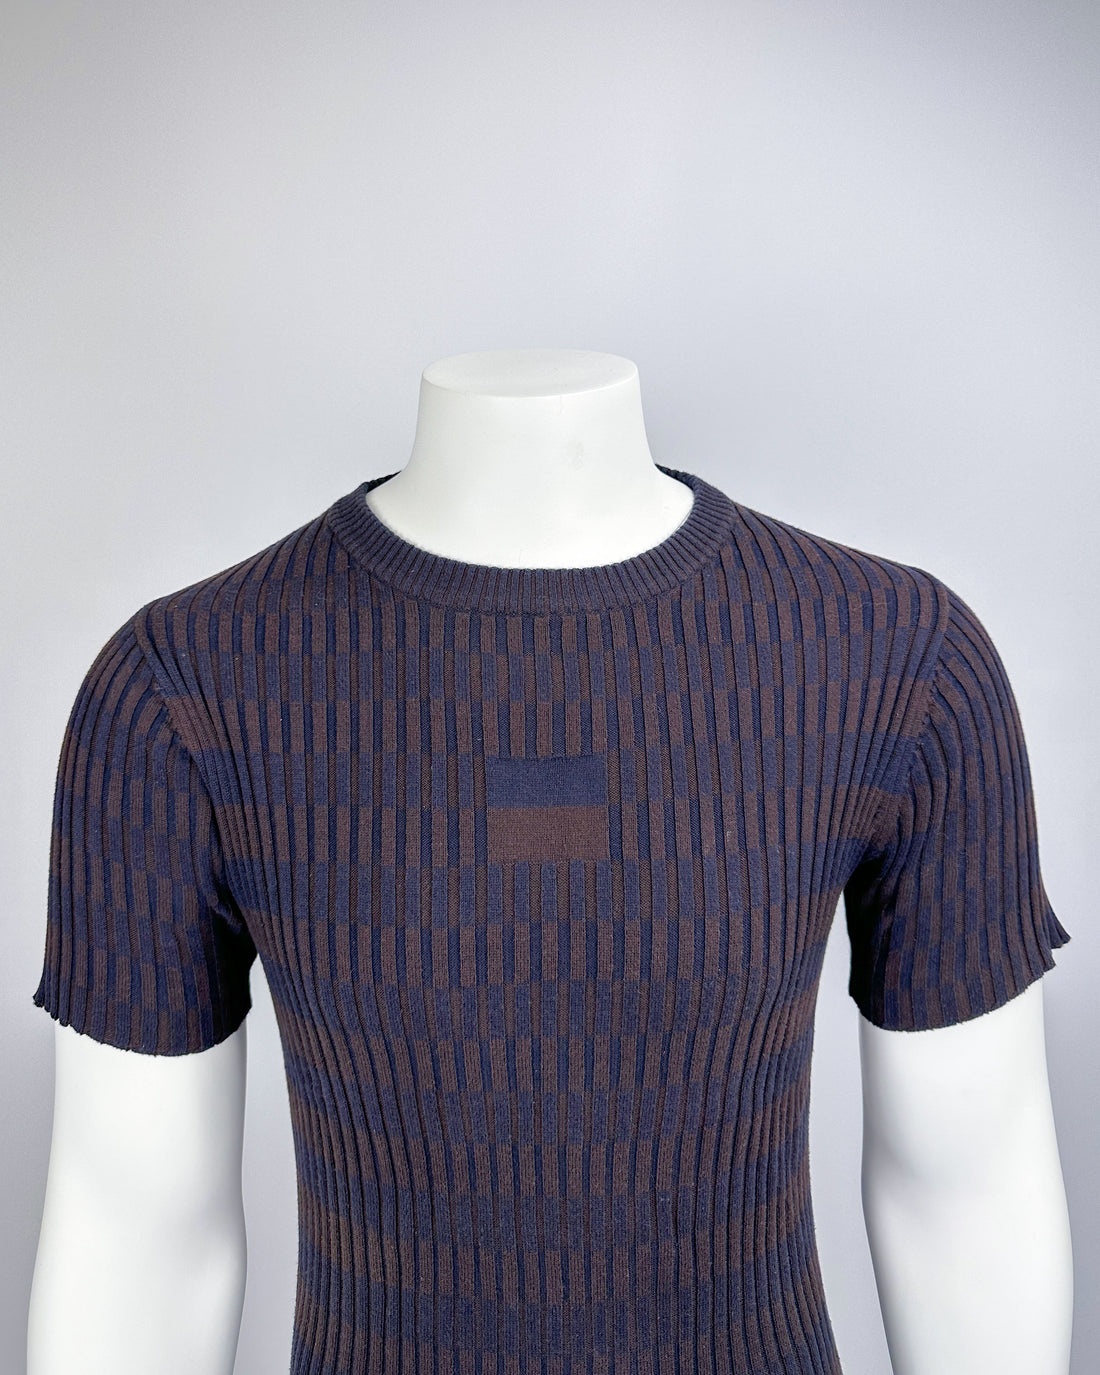 Marithé Francois Girbaud Stripped Knit Tee Top 2000's